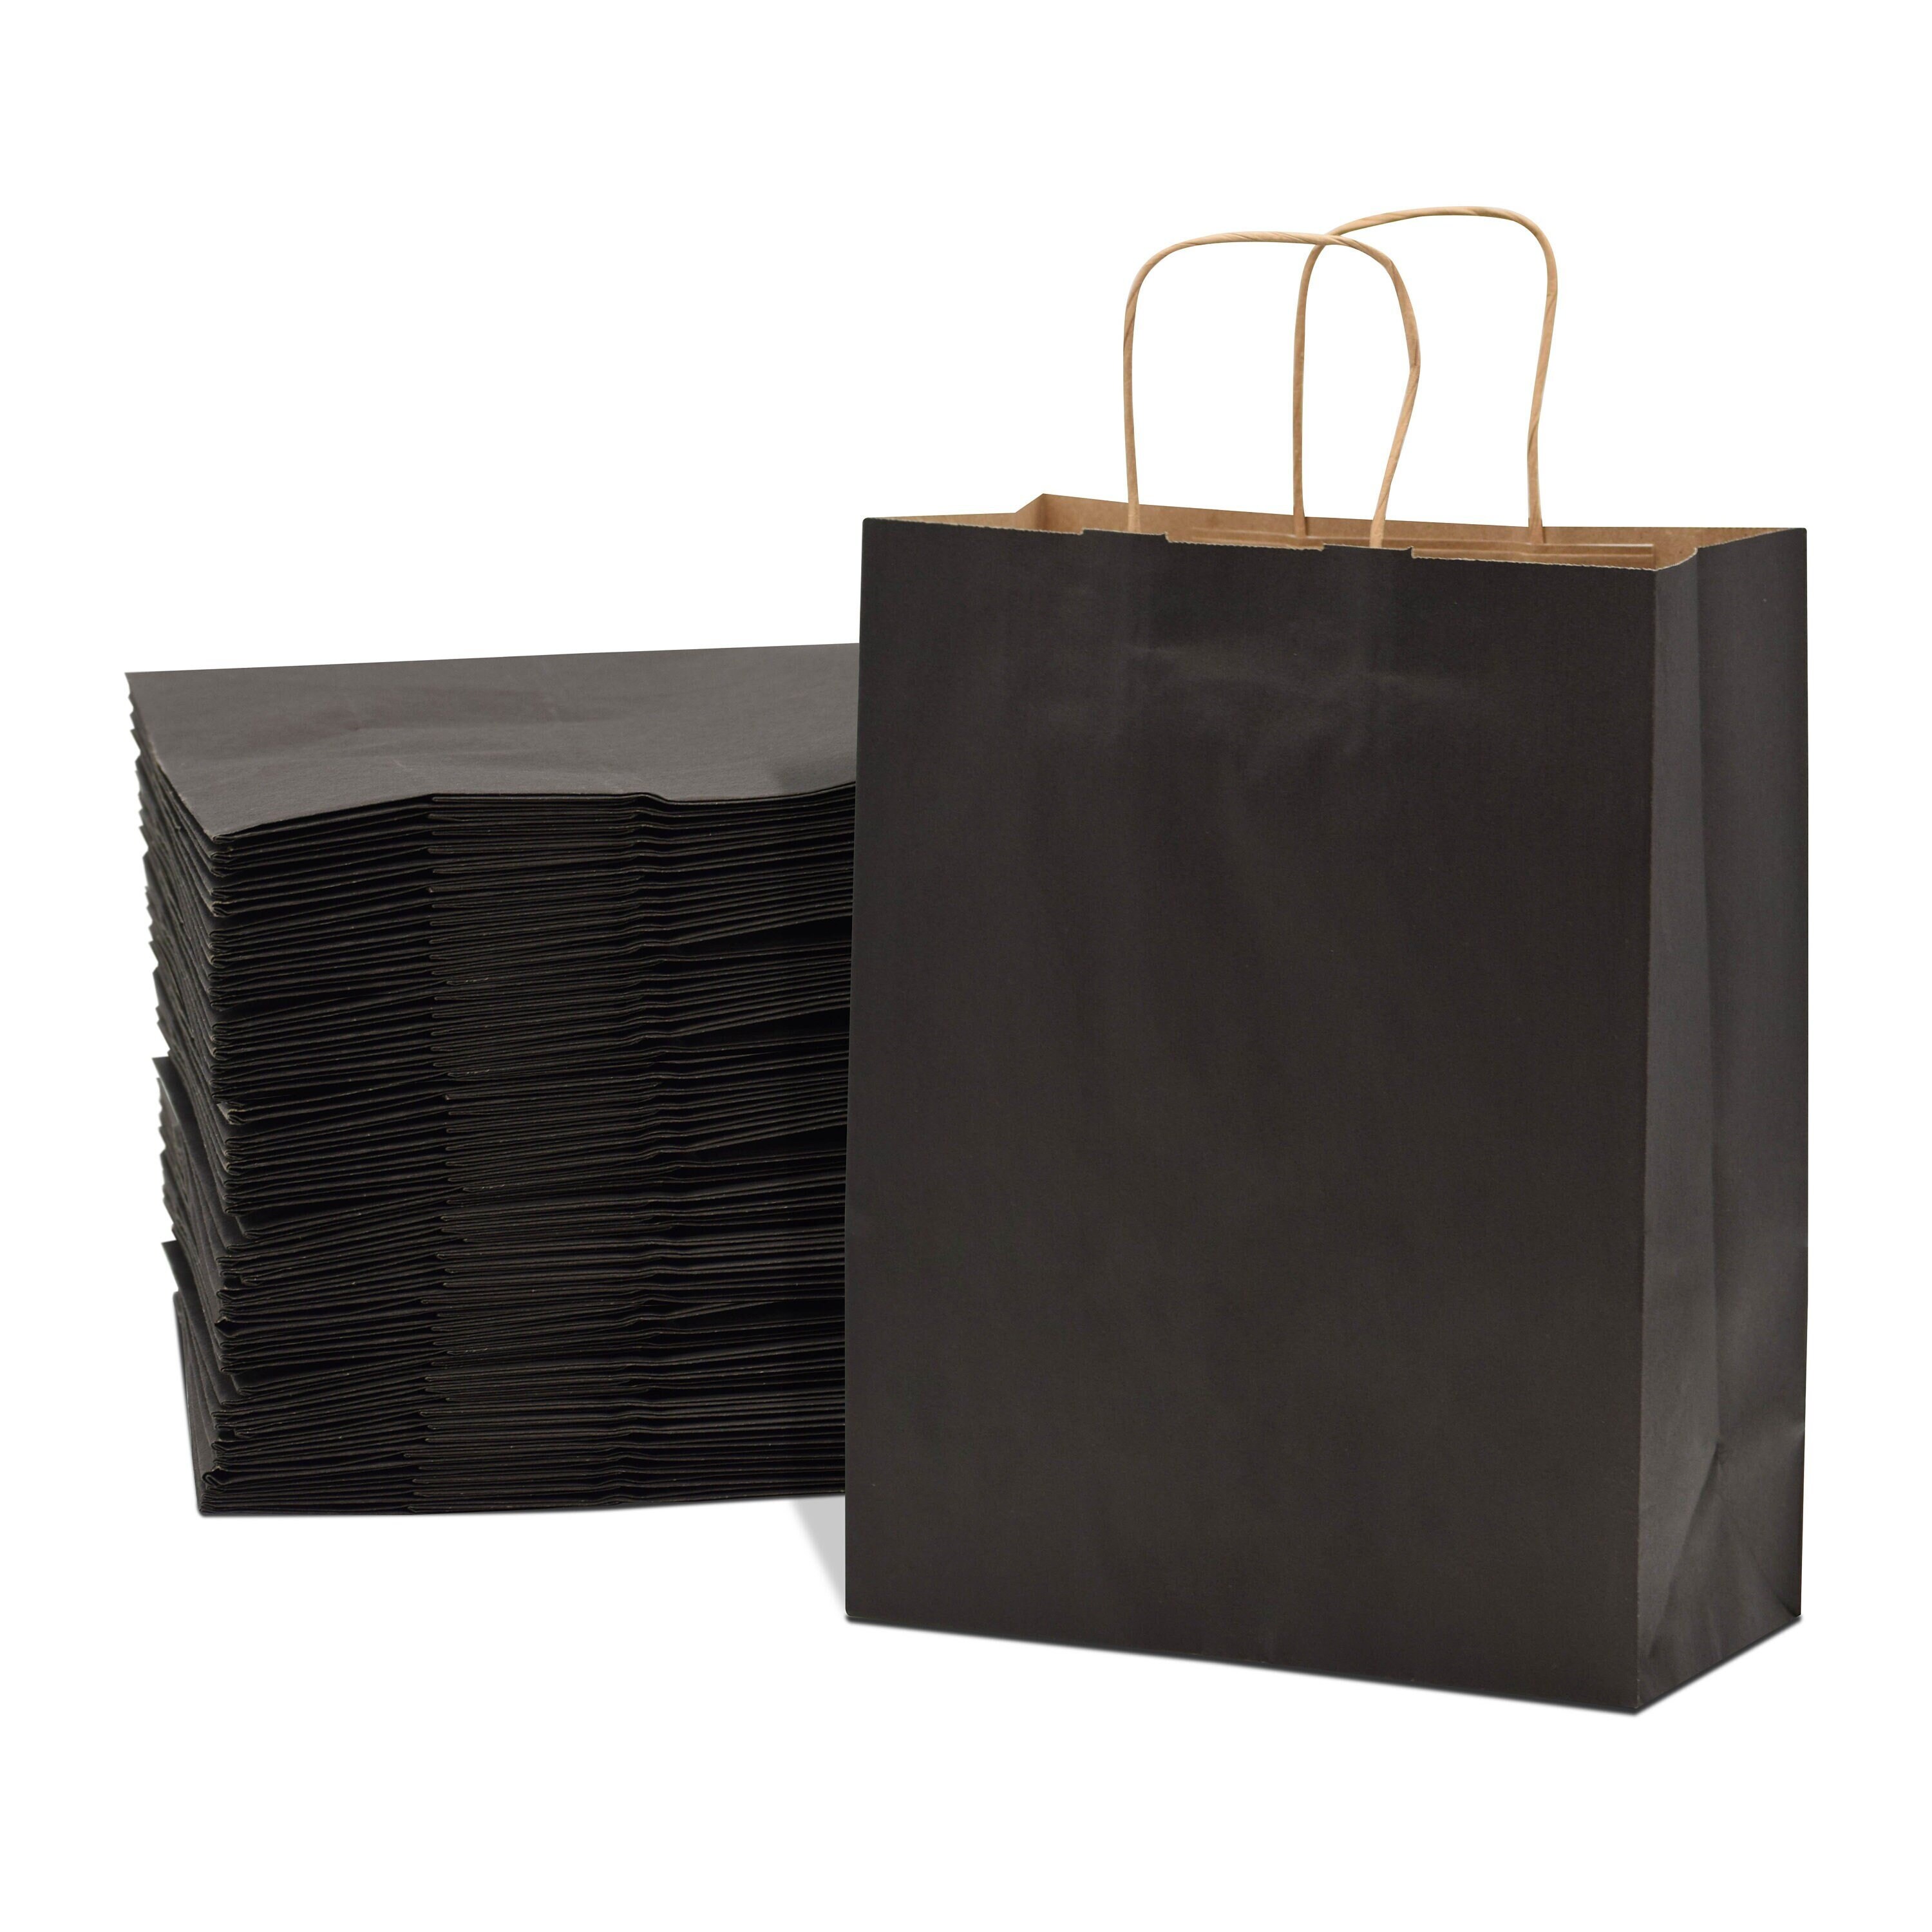  【24pcs Bags】Paper Bags With Handles- 8x10x4 Brown